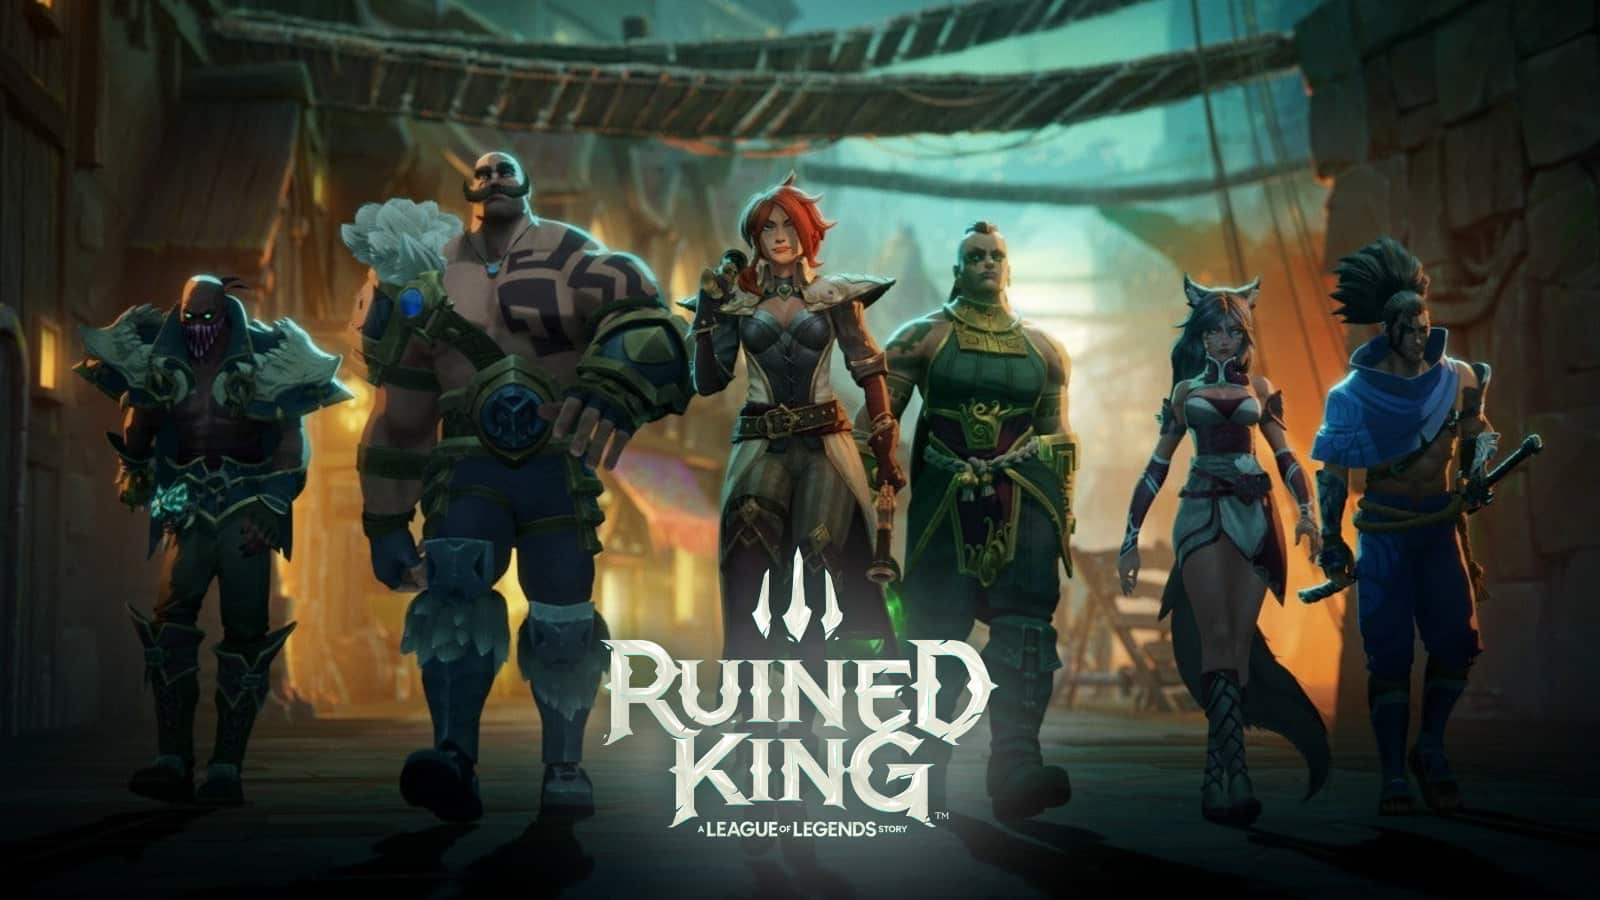 league of legends a ruined king story